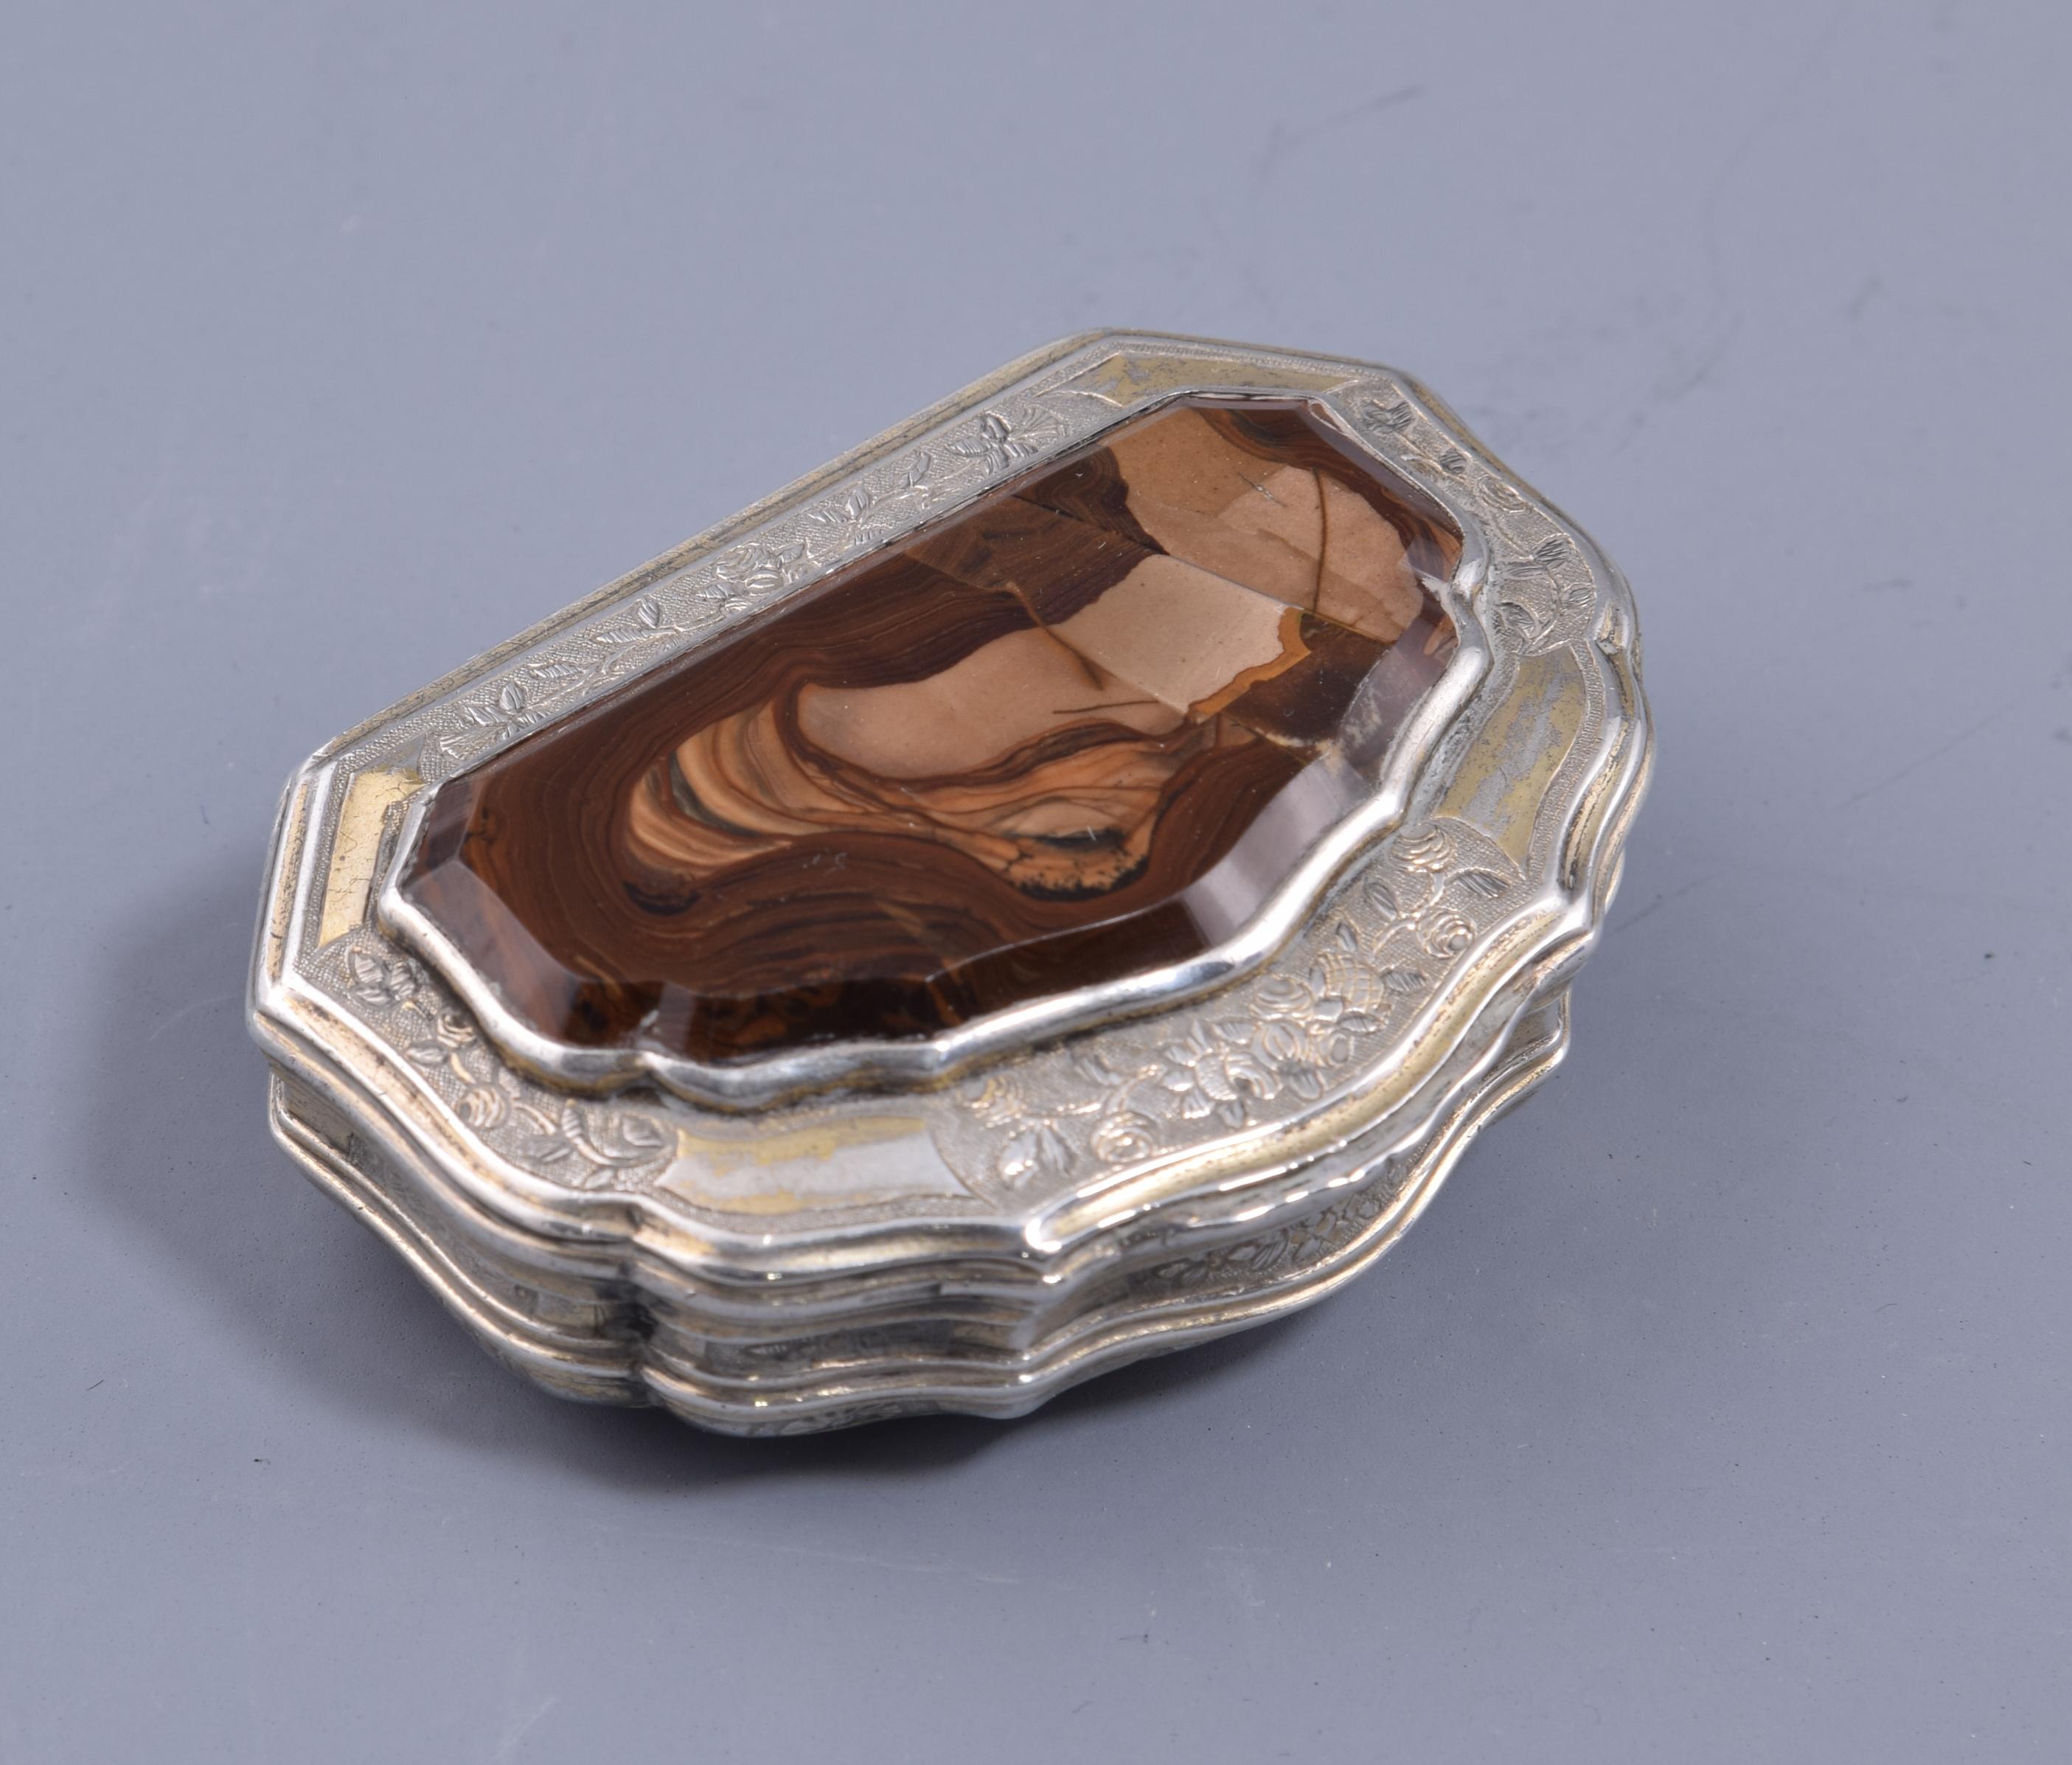 Neoclassical Box. Silver, Agate, 19th Century, with Hallmarks